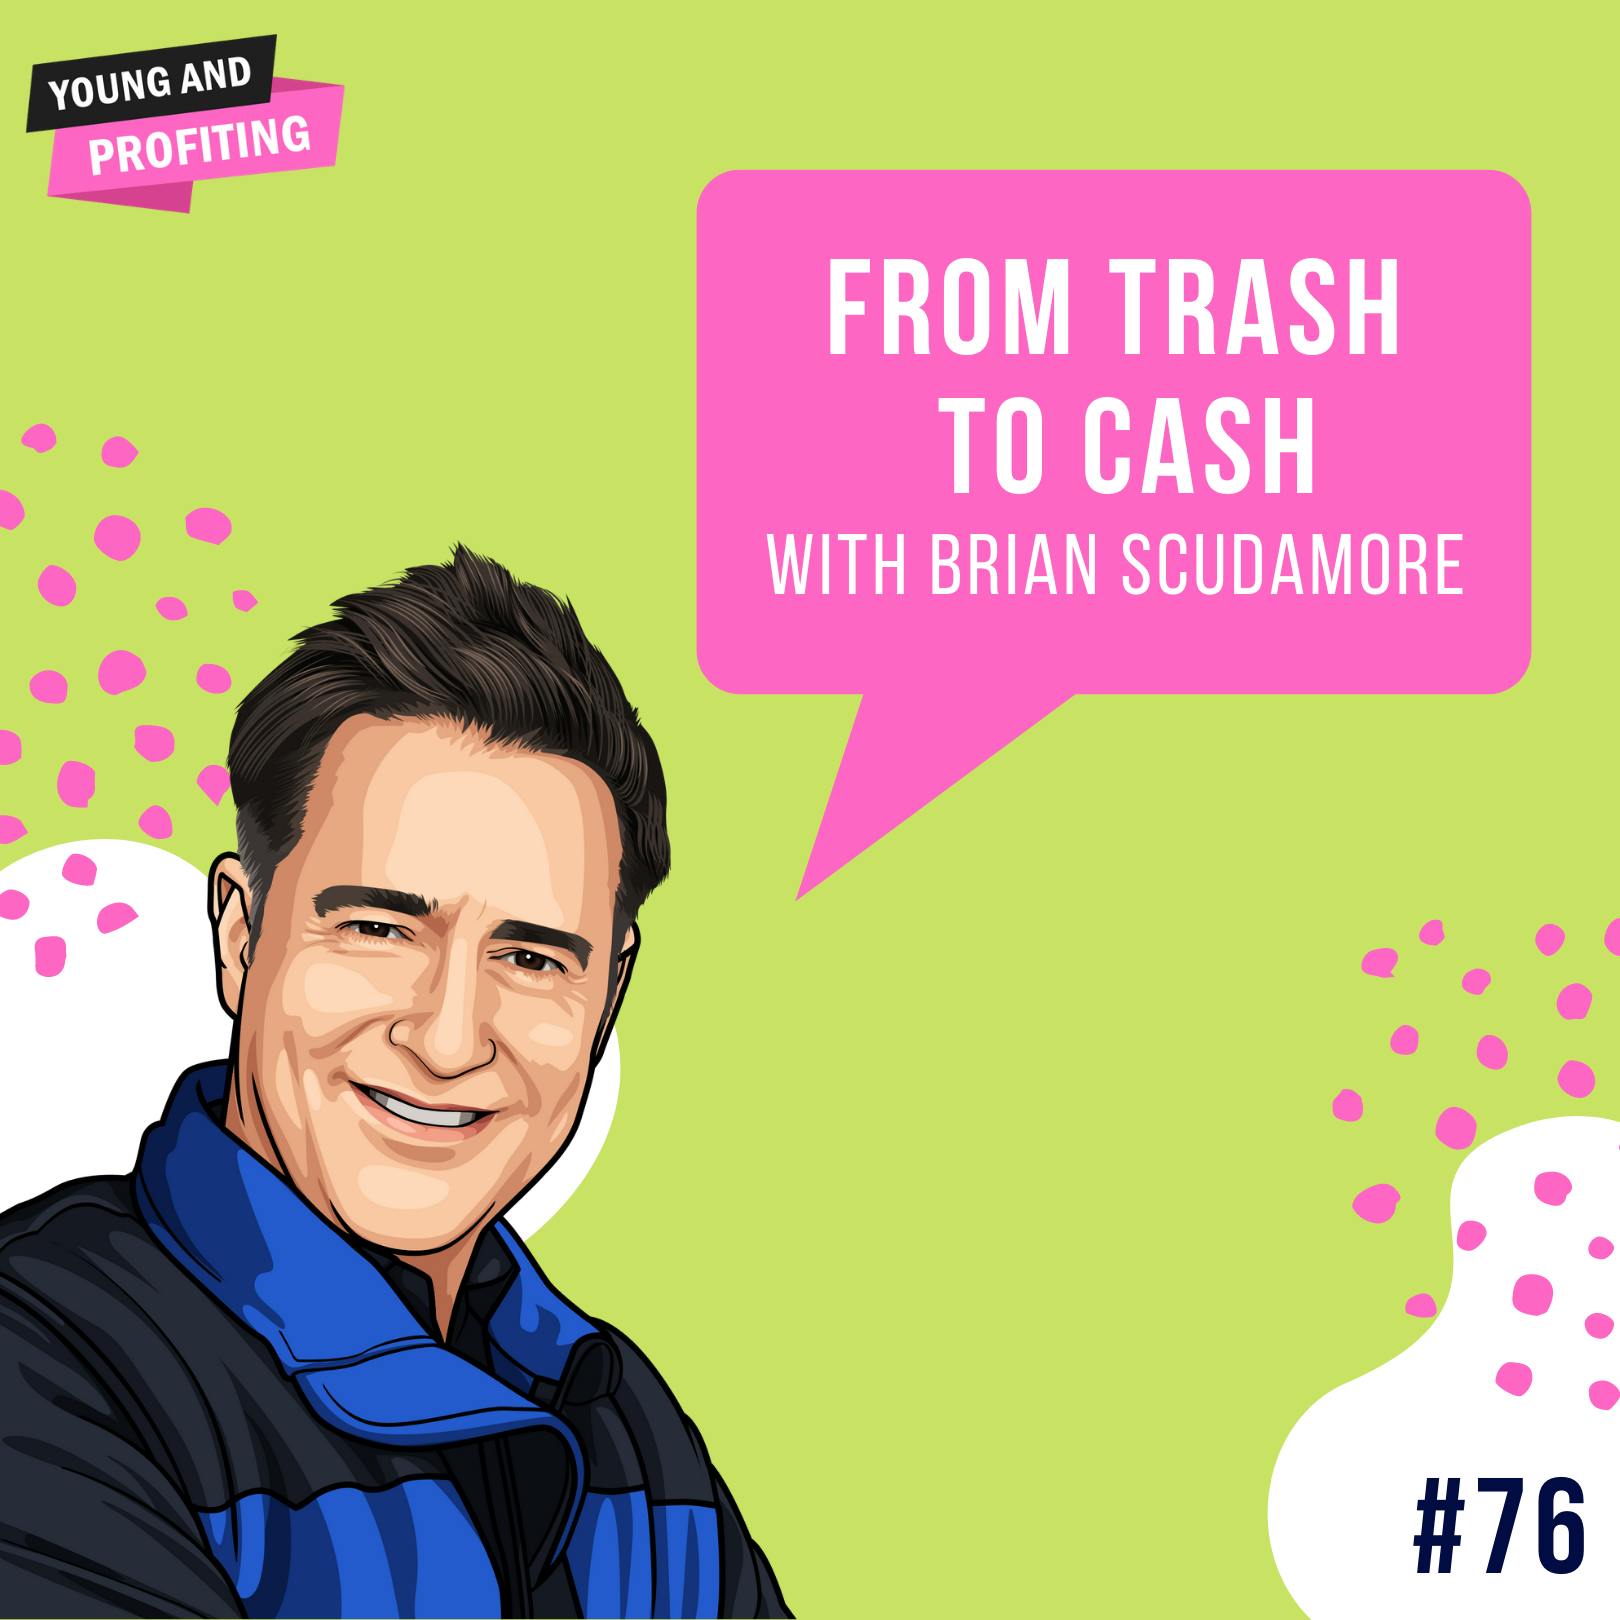 Brian Scudamore: From Trash to Cash | E76 by Hala Taha | YAP Media Network